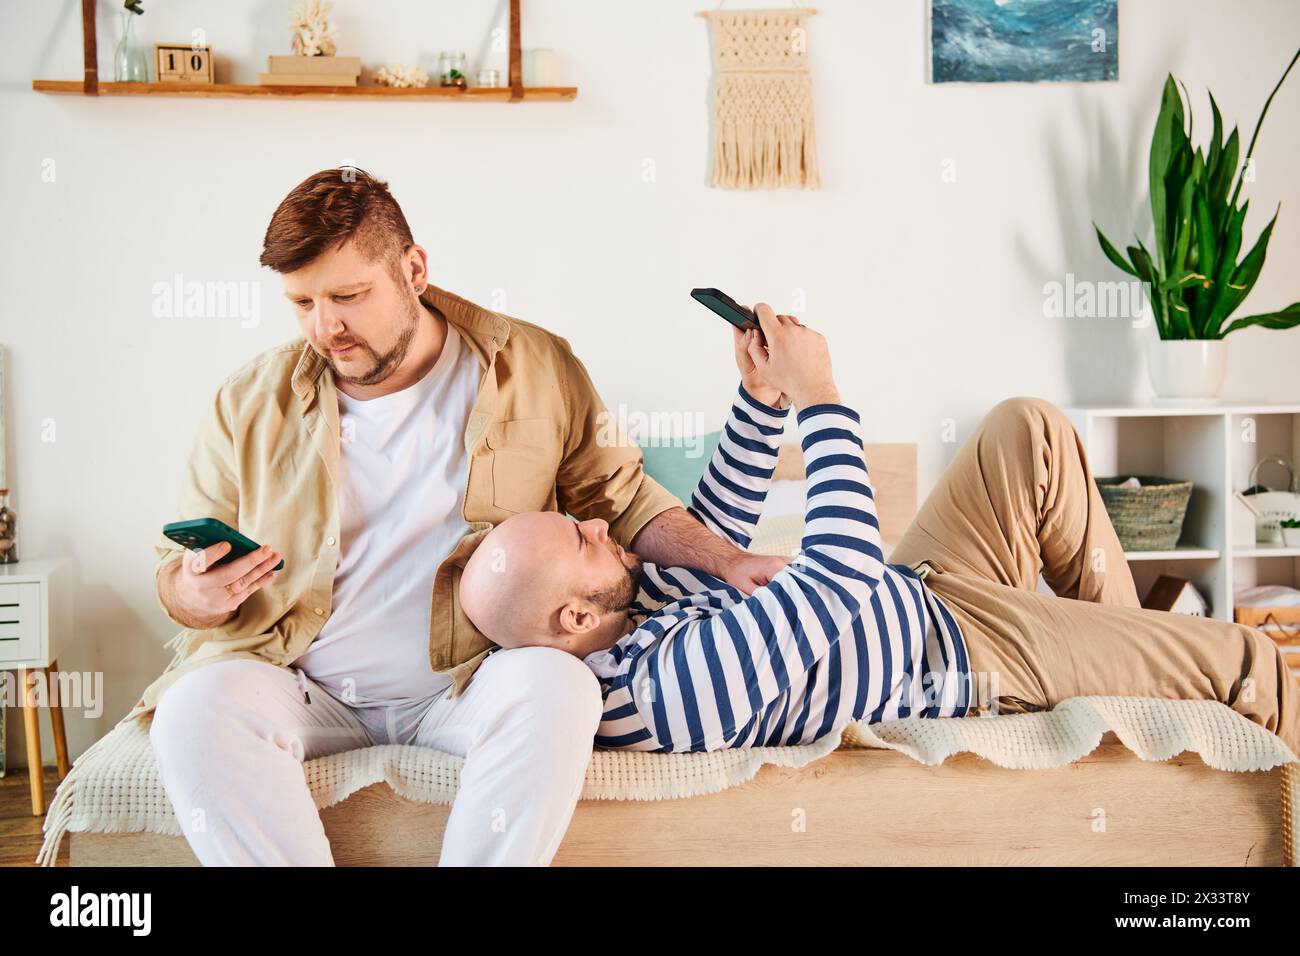 A man sits on a bed next to his boyfriend. Stock Photo